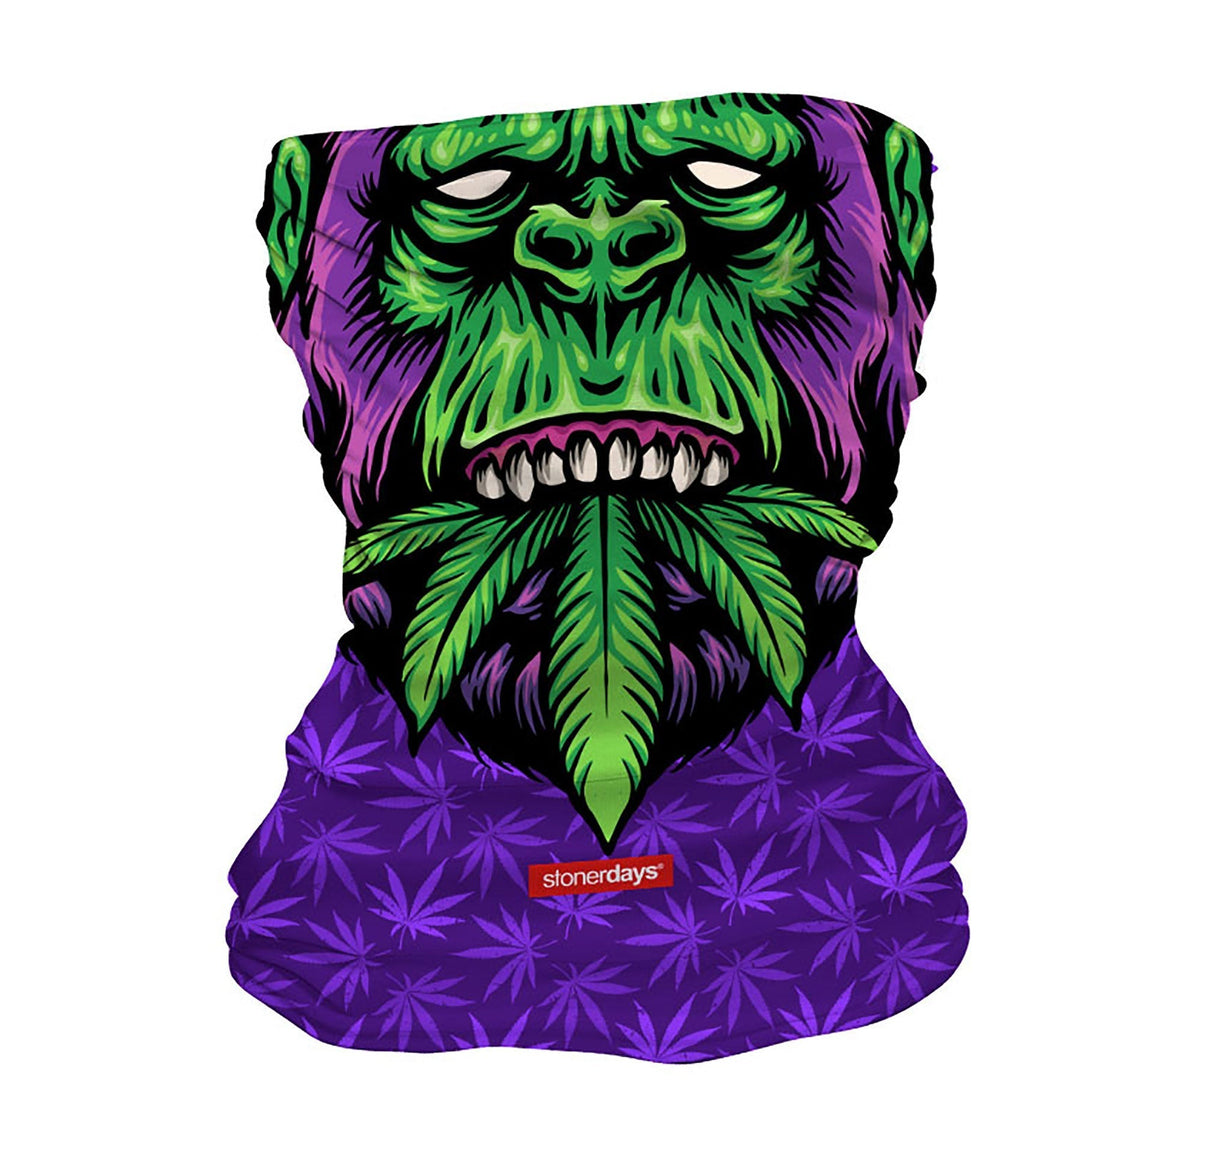 StonerDays Philly Blunts Neck Gaiter with vibrant purple leaf design and green gorilla graphic, front view